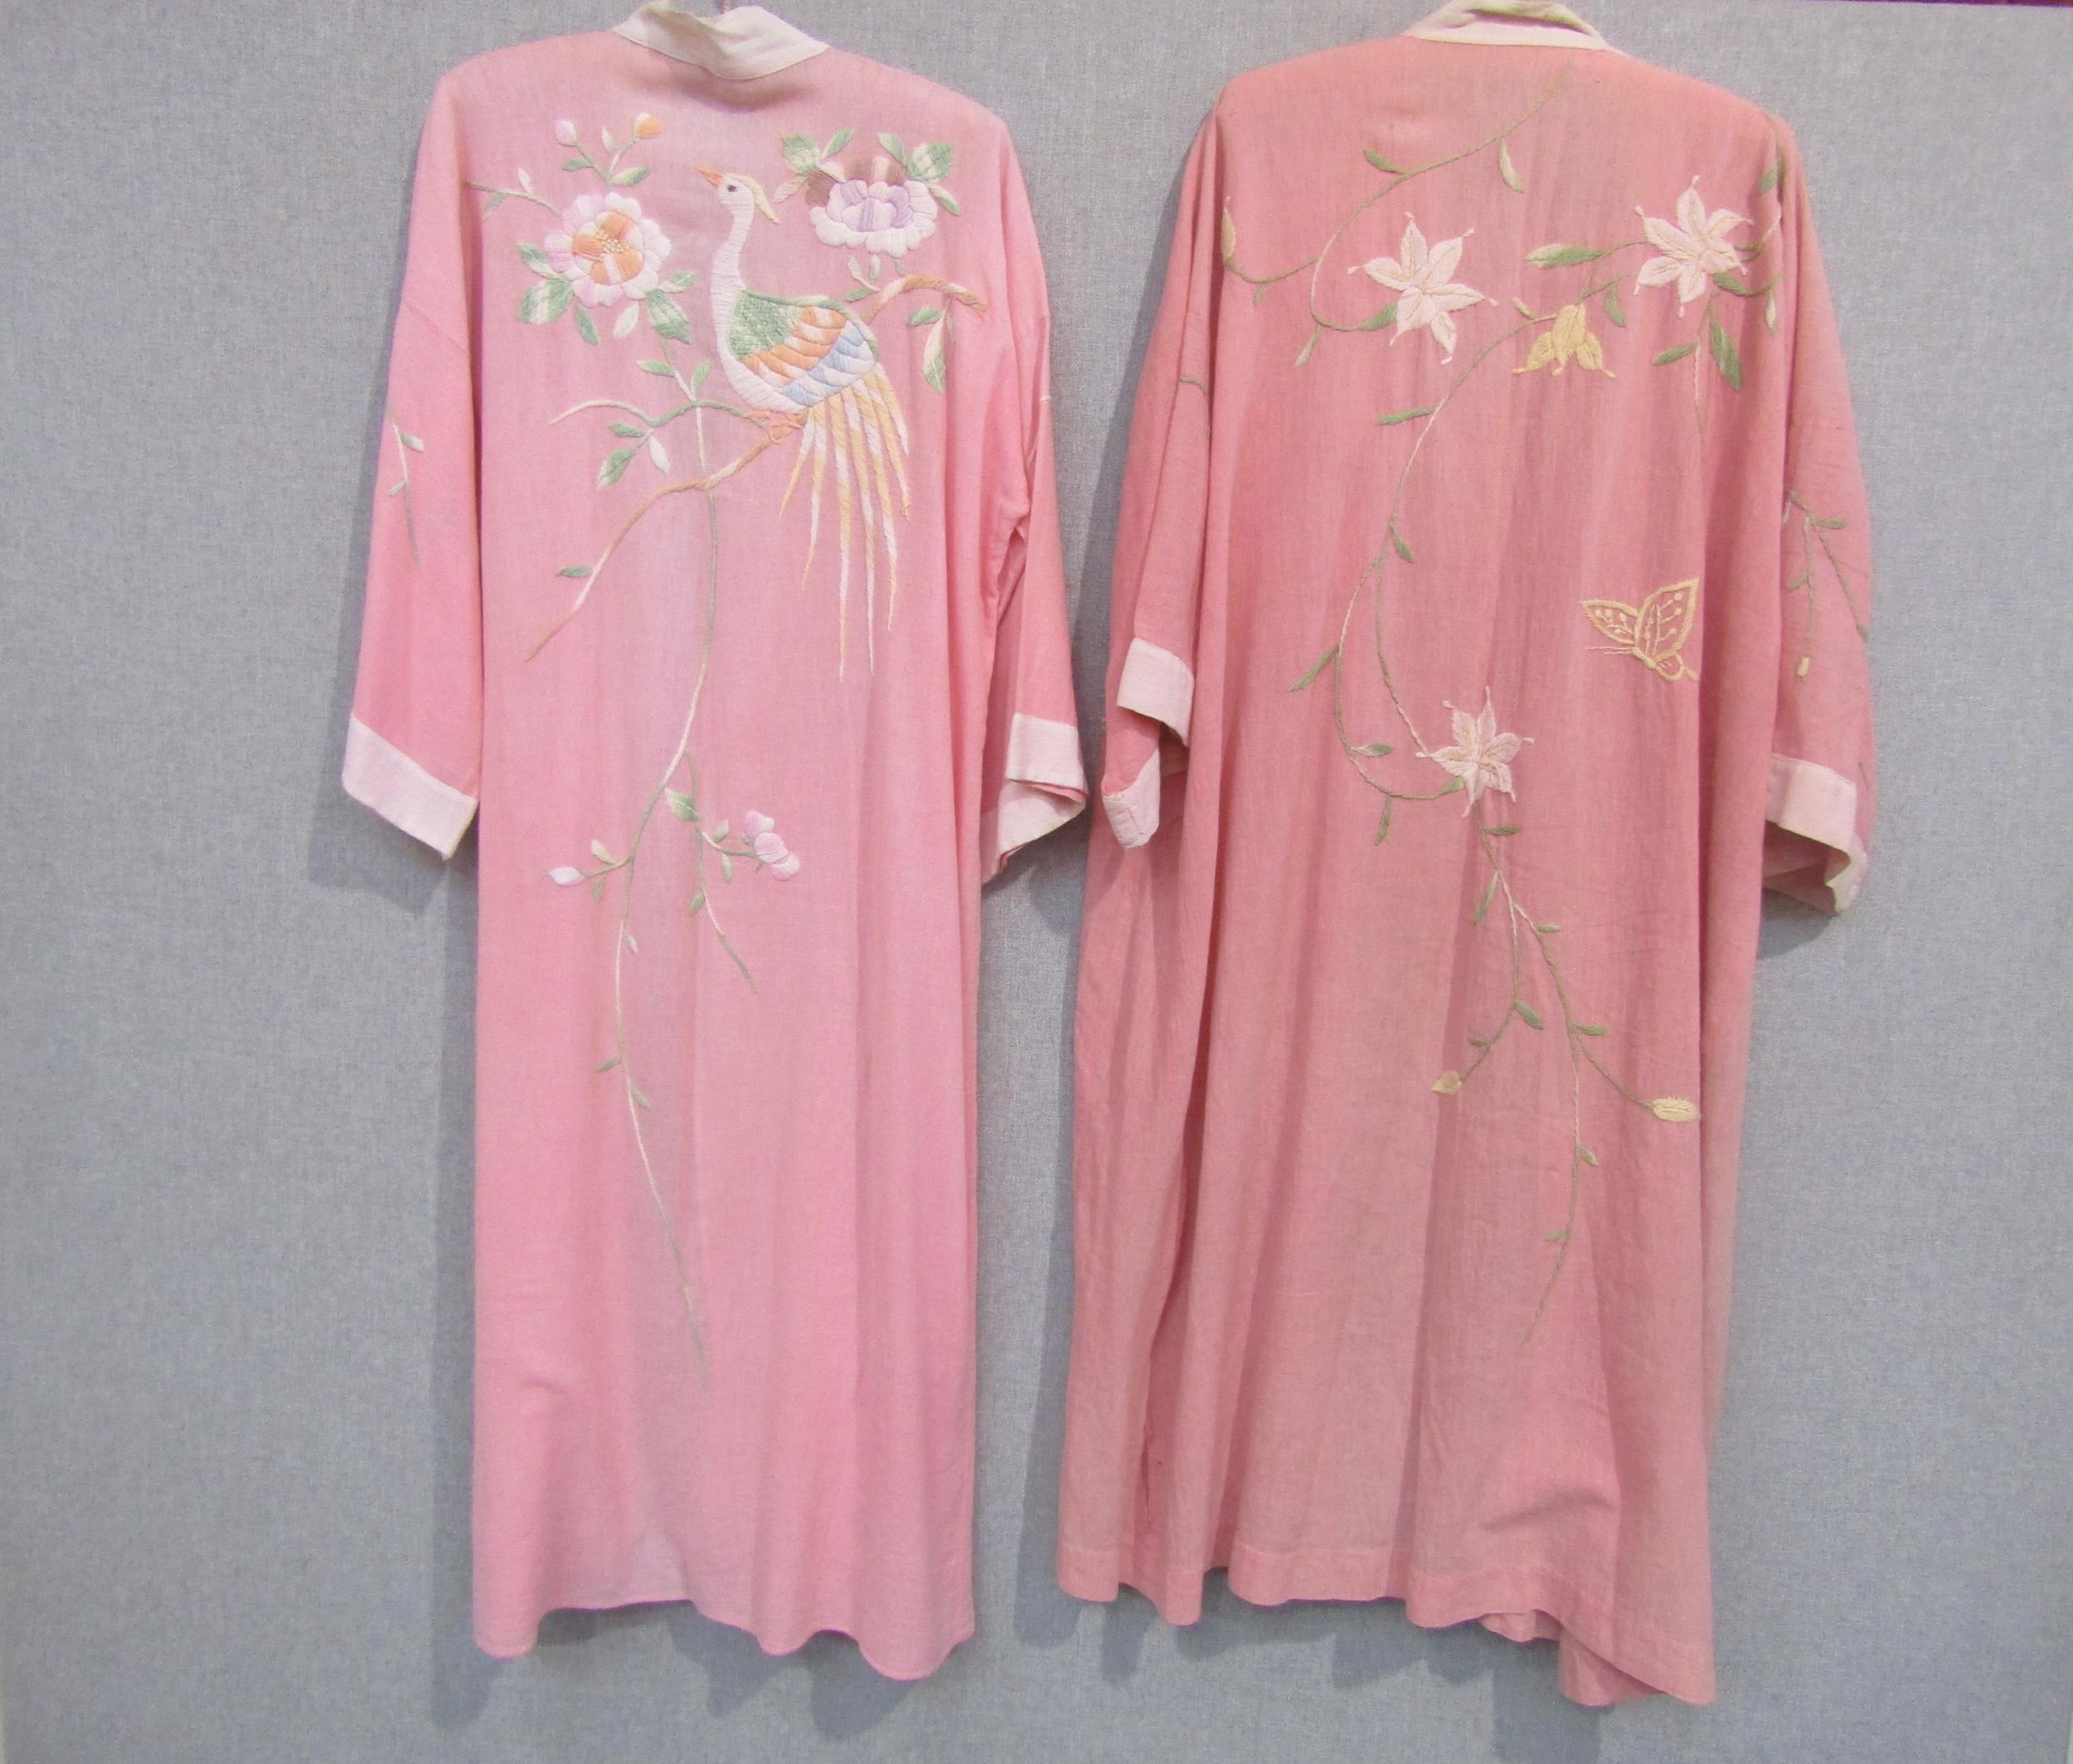 Two early 20th Century kimono style dressing gowns in pink, with hand embroidered floral detail - Image 4 of 4